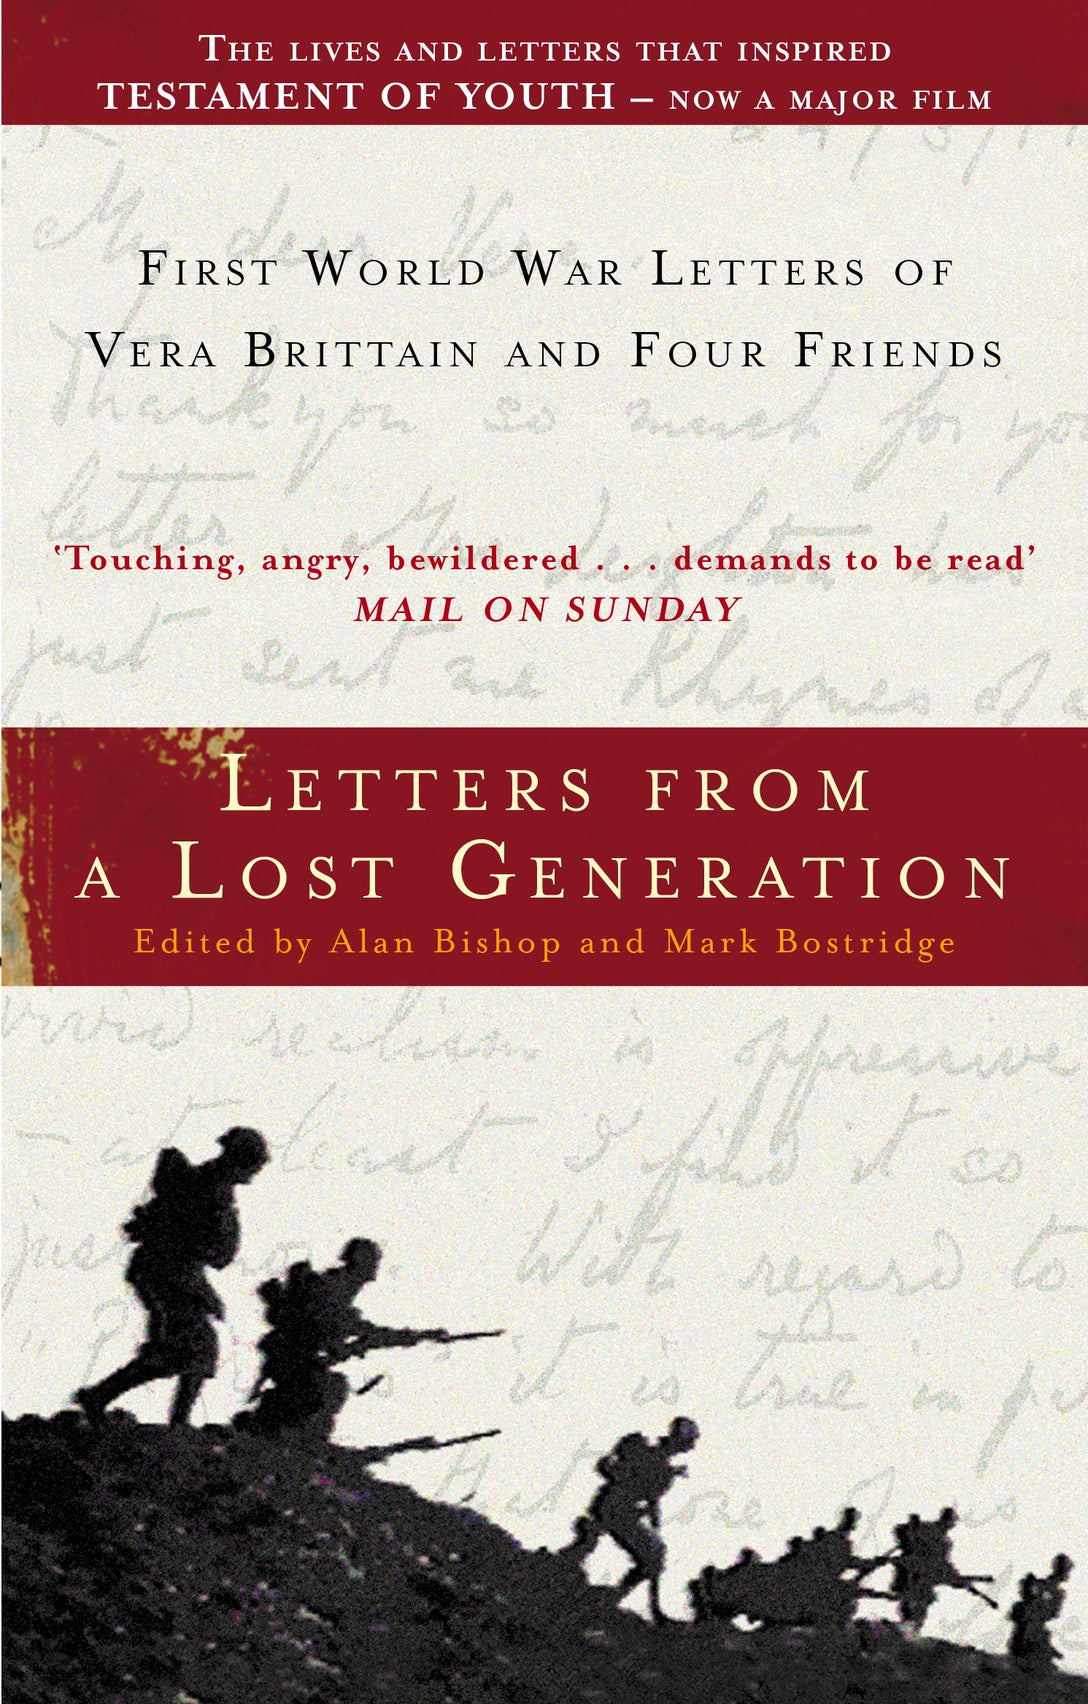 Letters From A Lost Generation by Mark Bostridge, Mark Bostridge, Alan Bishop, Alan Bishop, Mark Bostridge